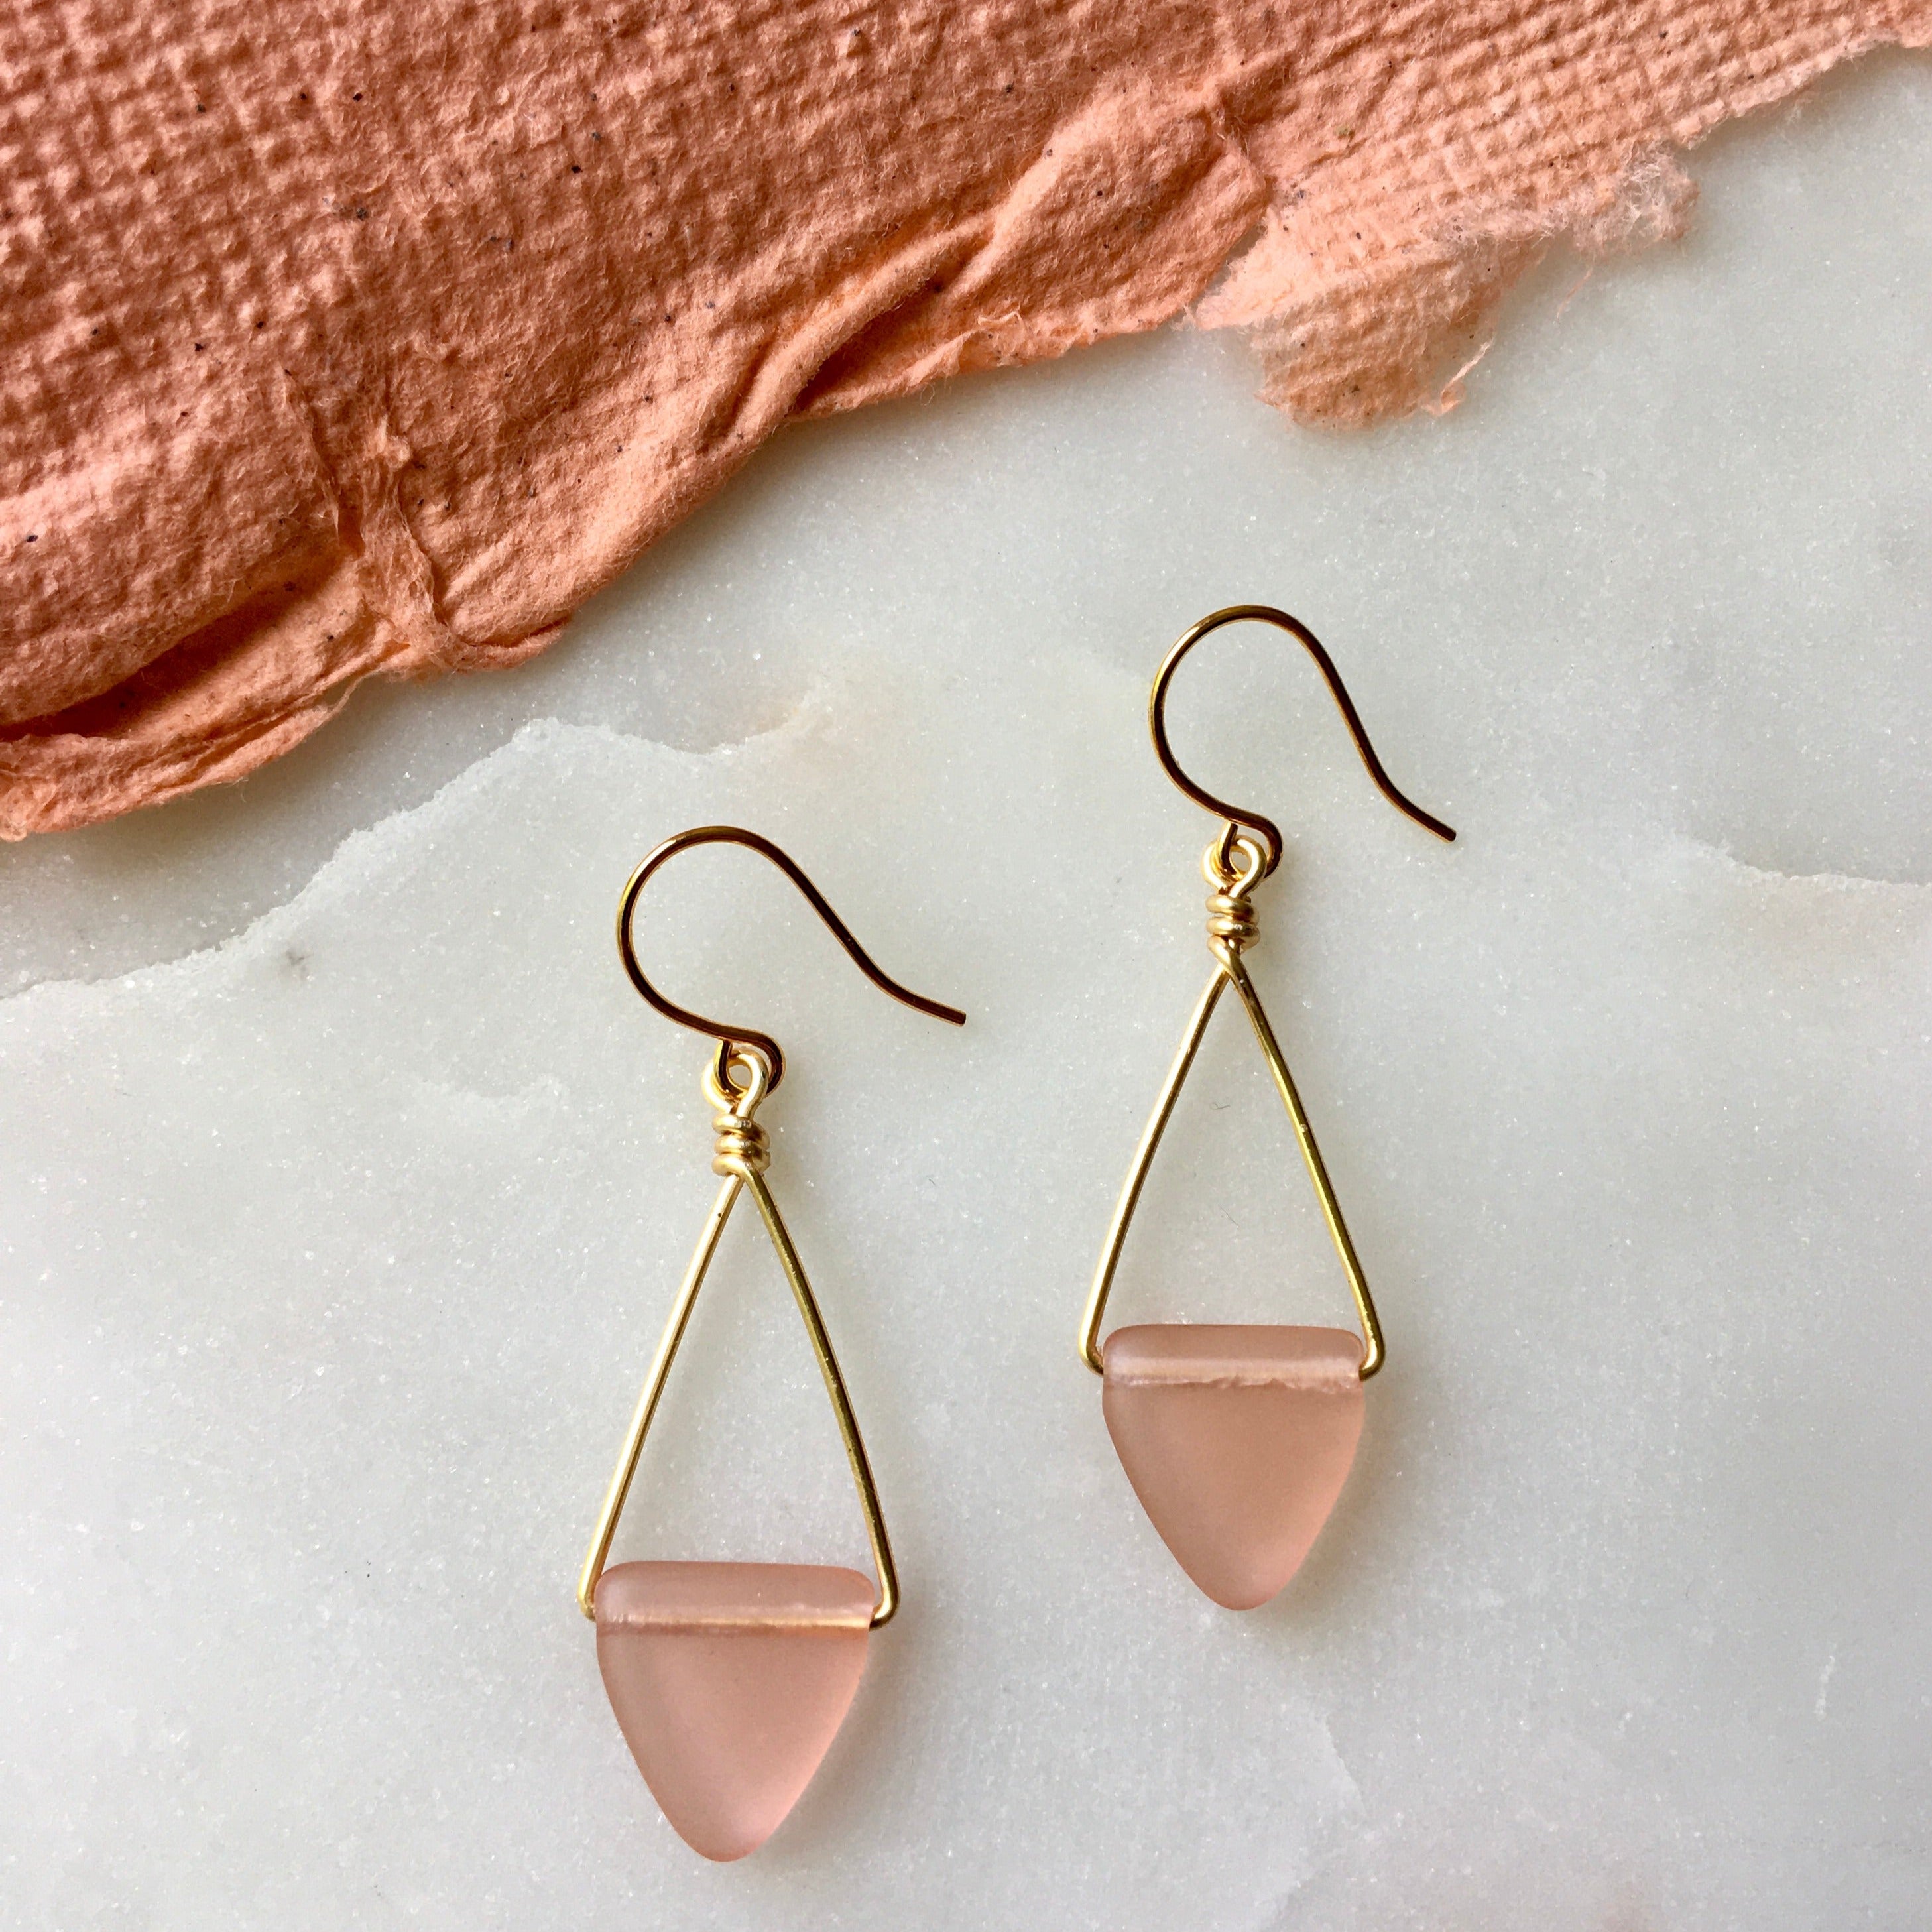 Pink Triangle Hoops